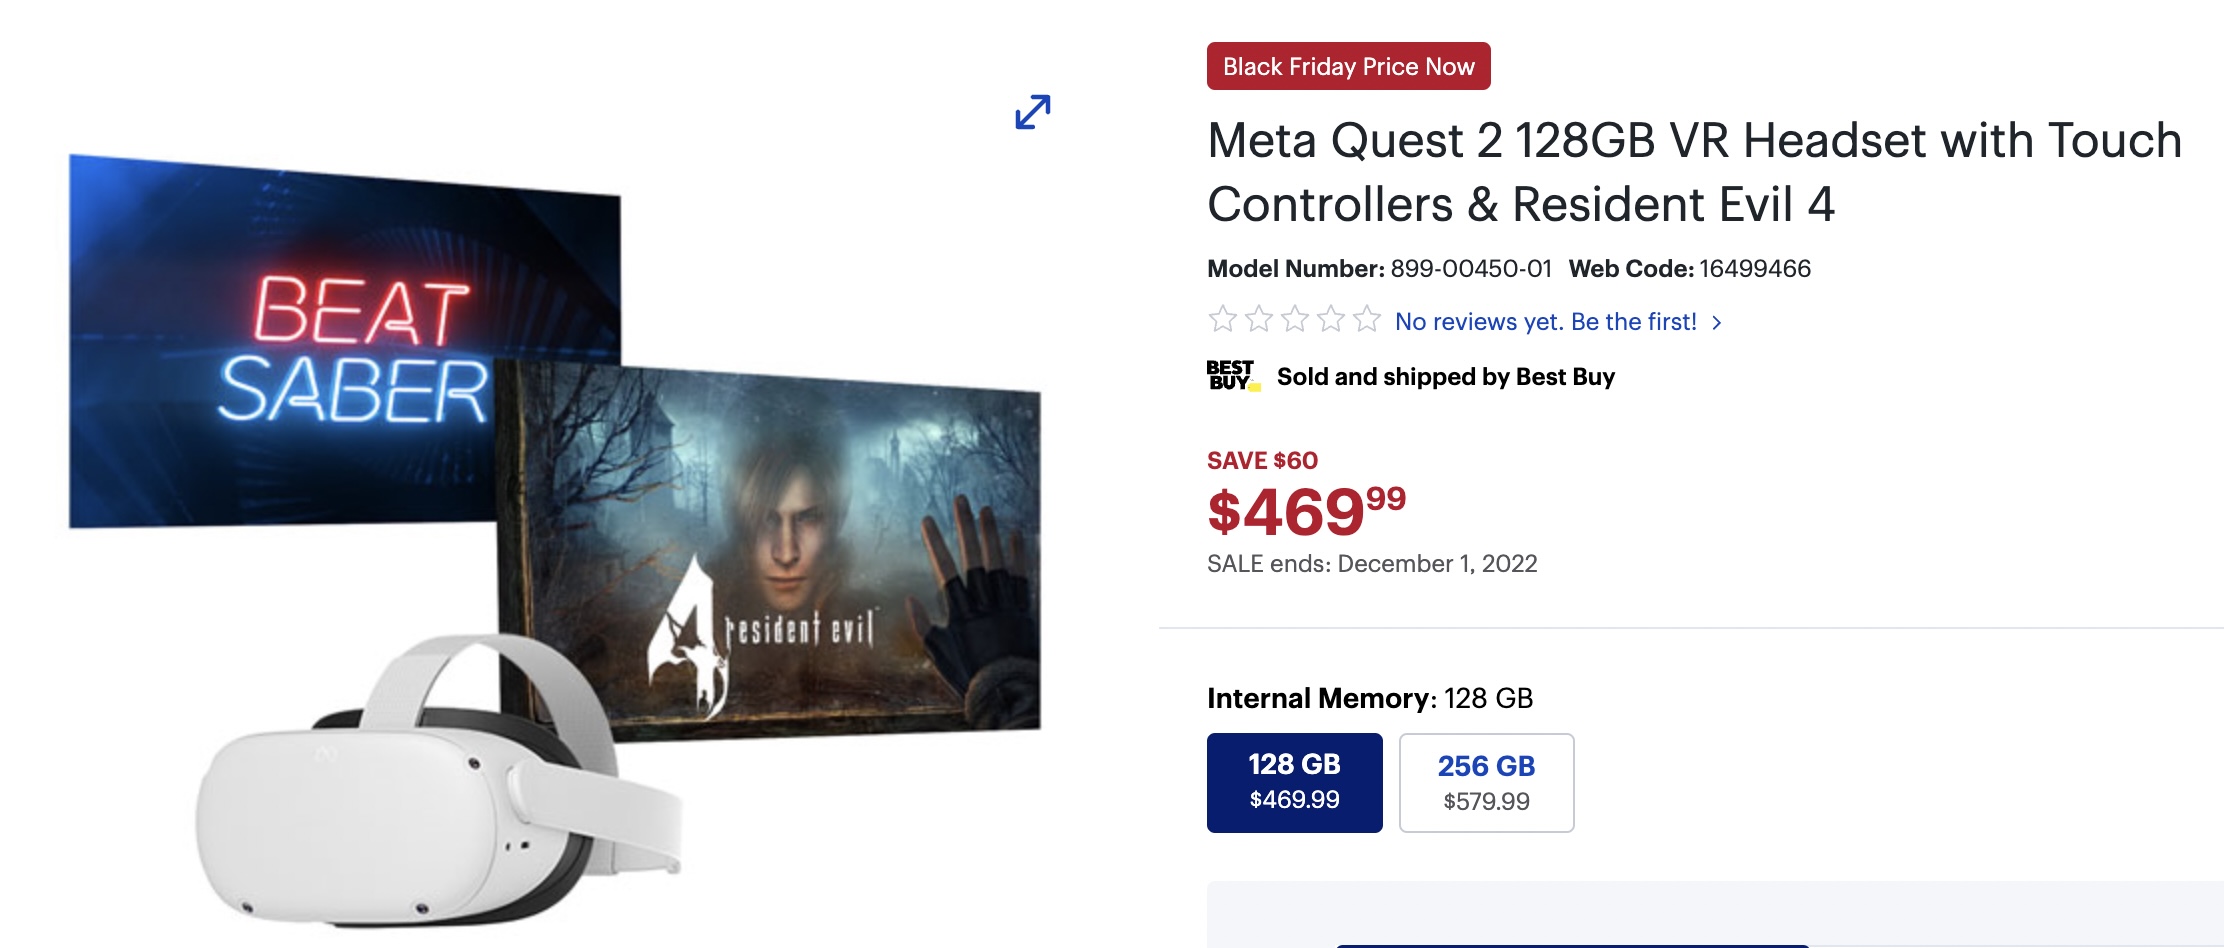 Amazon.ca Black Friday Daels: Meta Quest 2 128GB VR Headset with